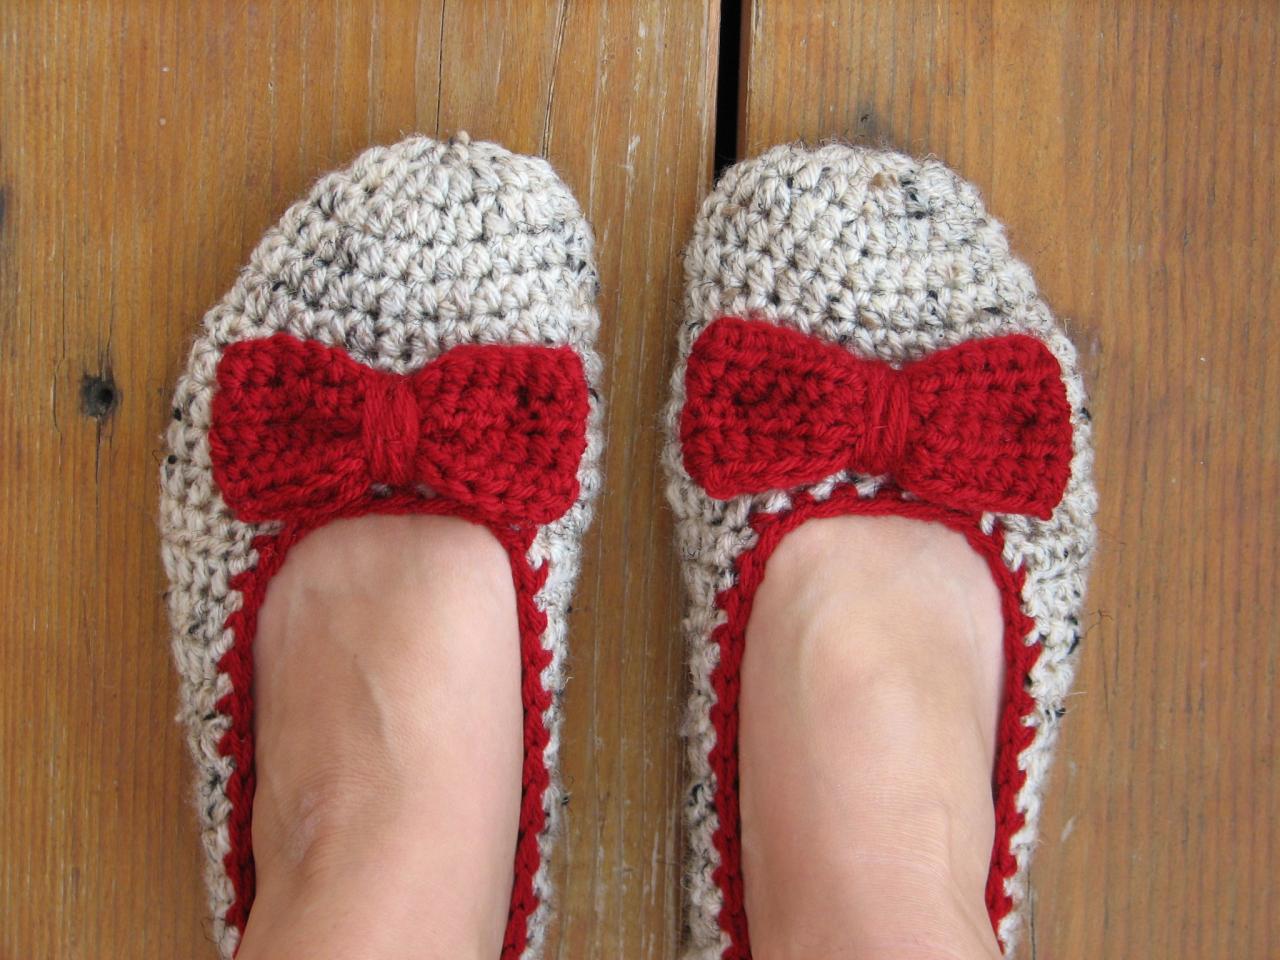 Crochet Women Slippers - Oatmeal With Red Bow, Accessories, Adult Crochet Slippers, Home Shoes, Crochet Women Slippers